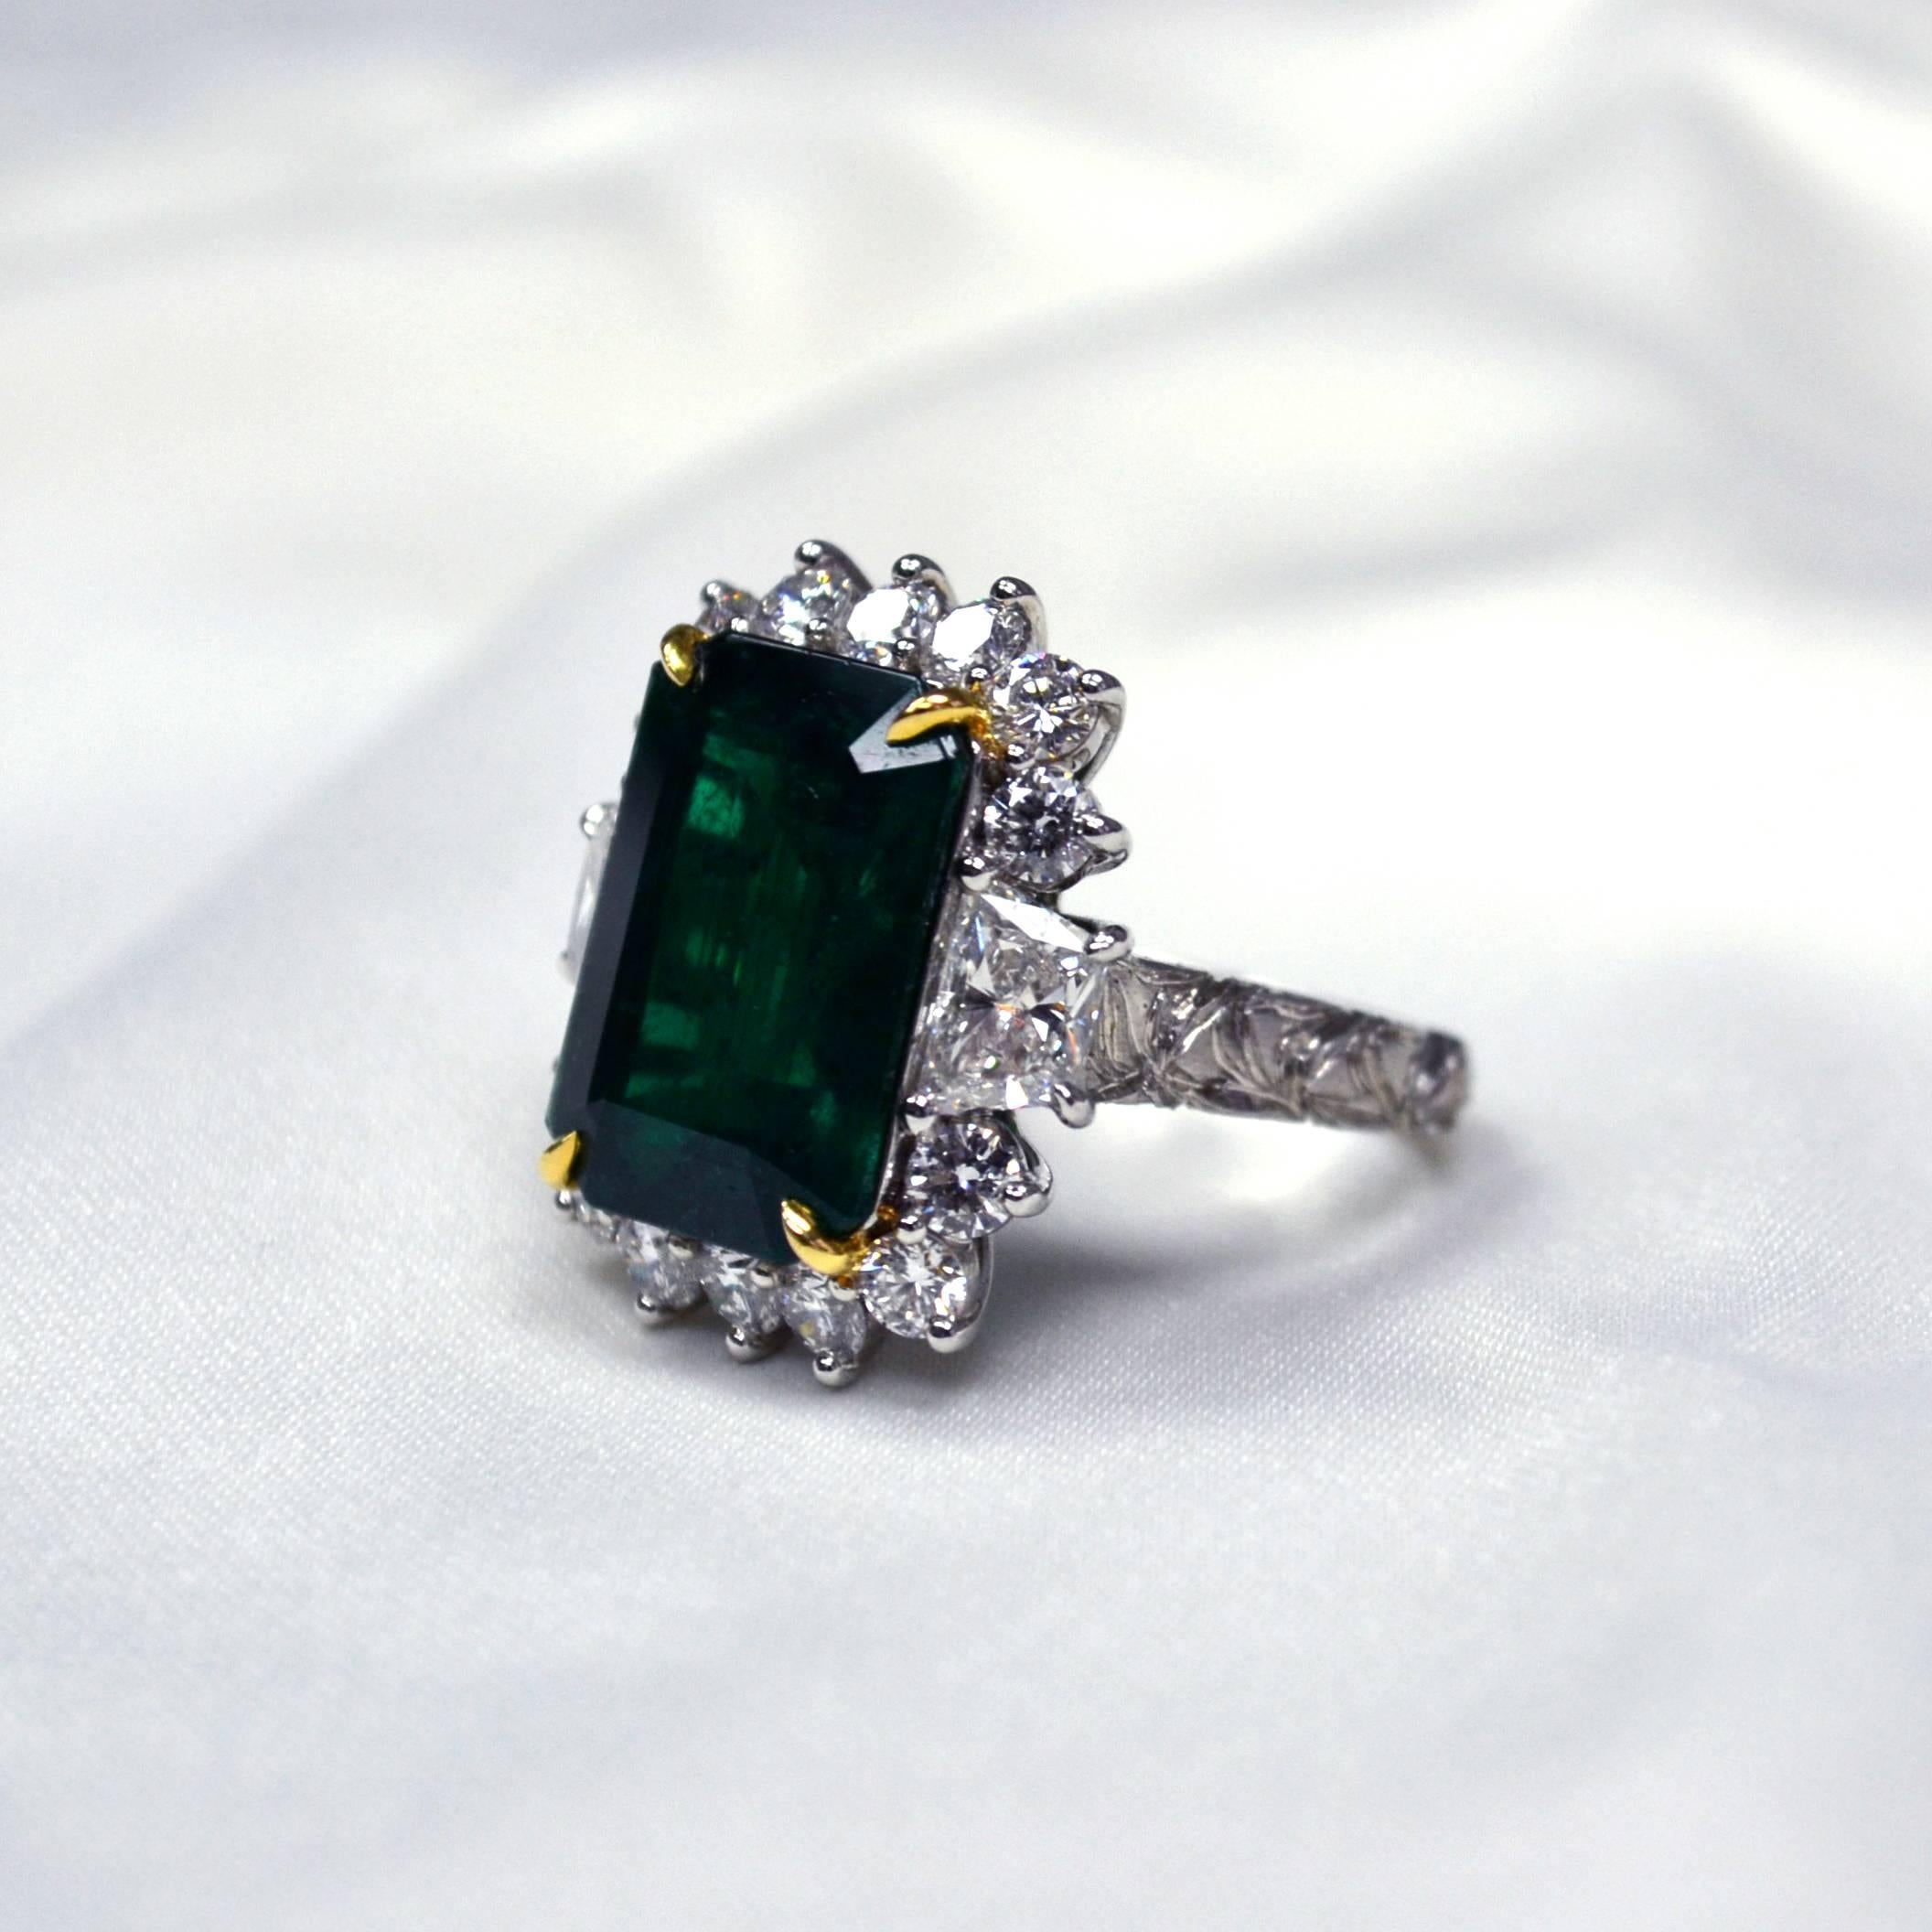 Ring in platinum set with an intense green emerald cut Zambian Emerald (7.78 carat), 2 trapezoid cut Diamonds (1.43 carats) and 14 round brilliant-cut Diamonds (1.36 carats).

Featuring beautifully carved shank.
Ring US Size 6.
*Complimentary